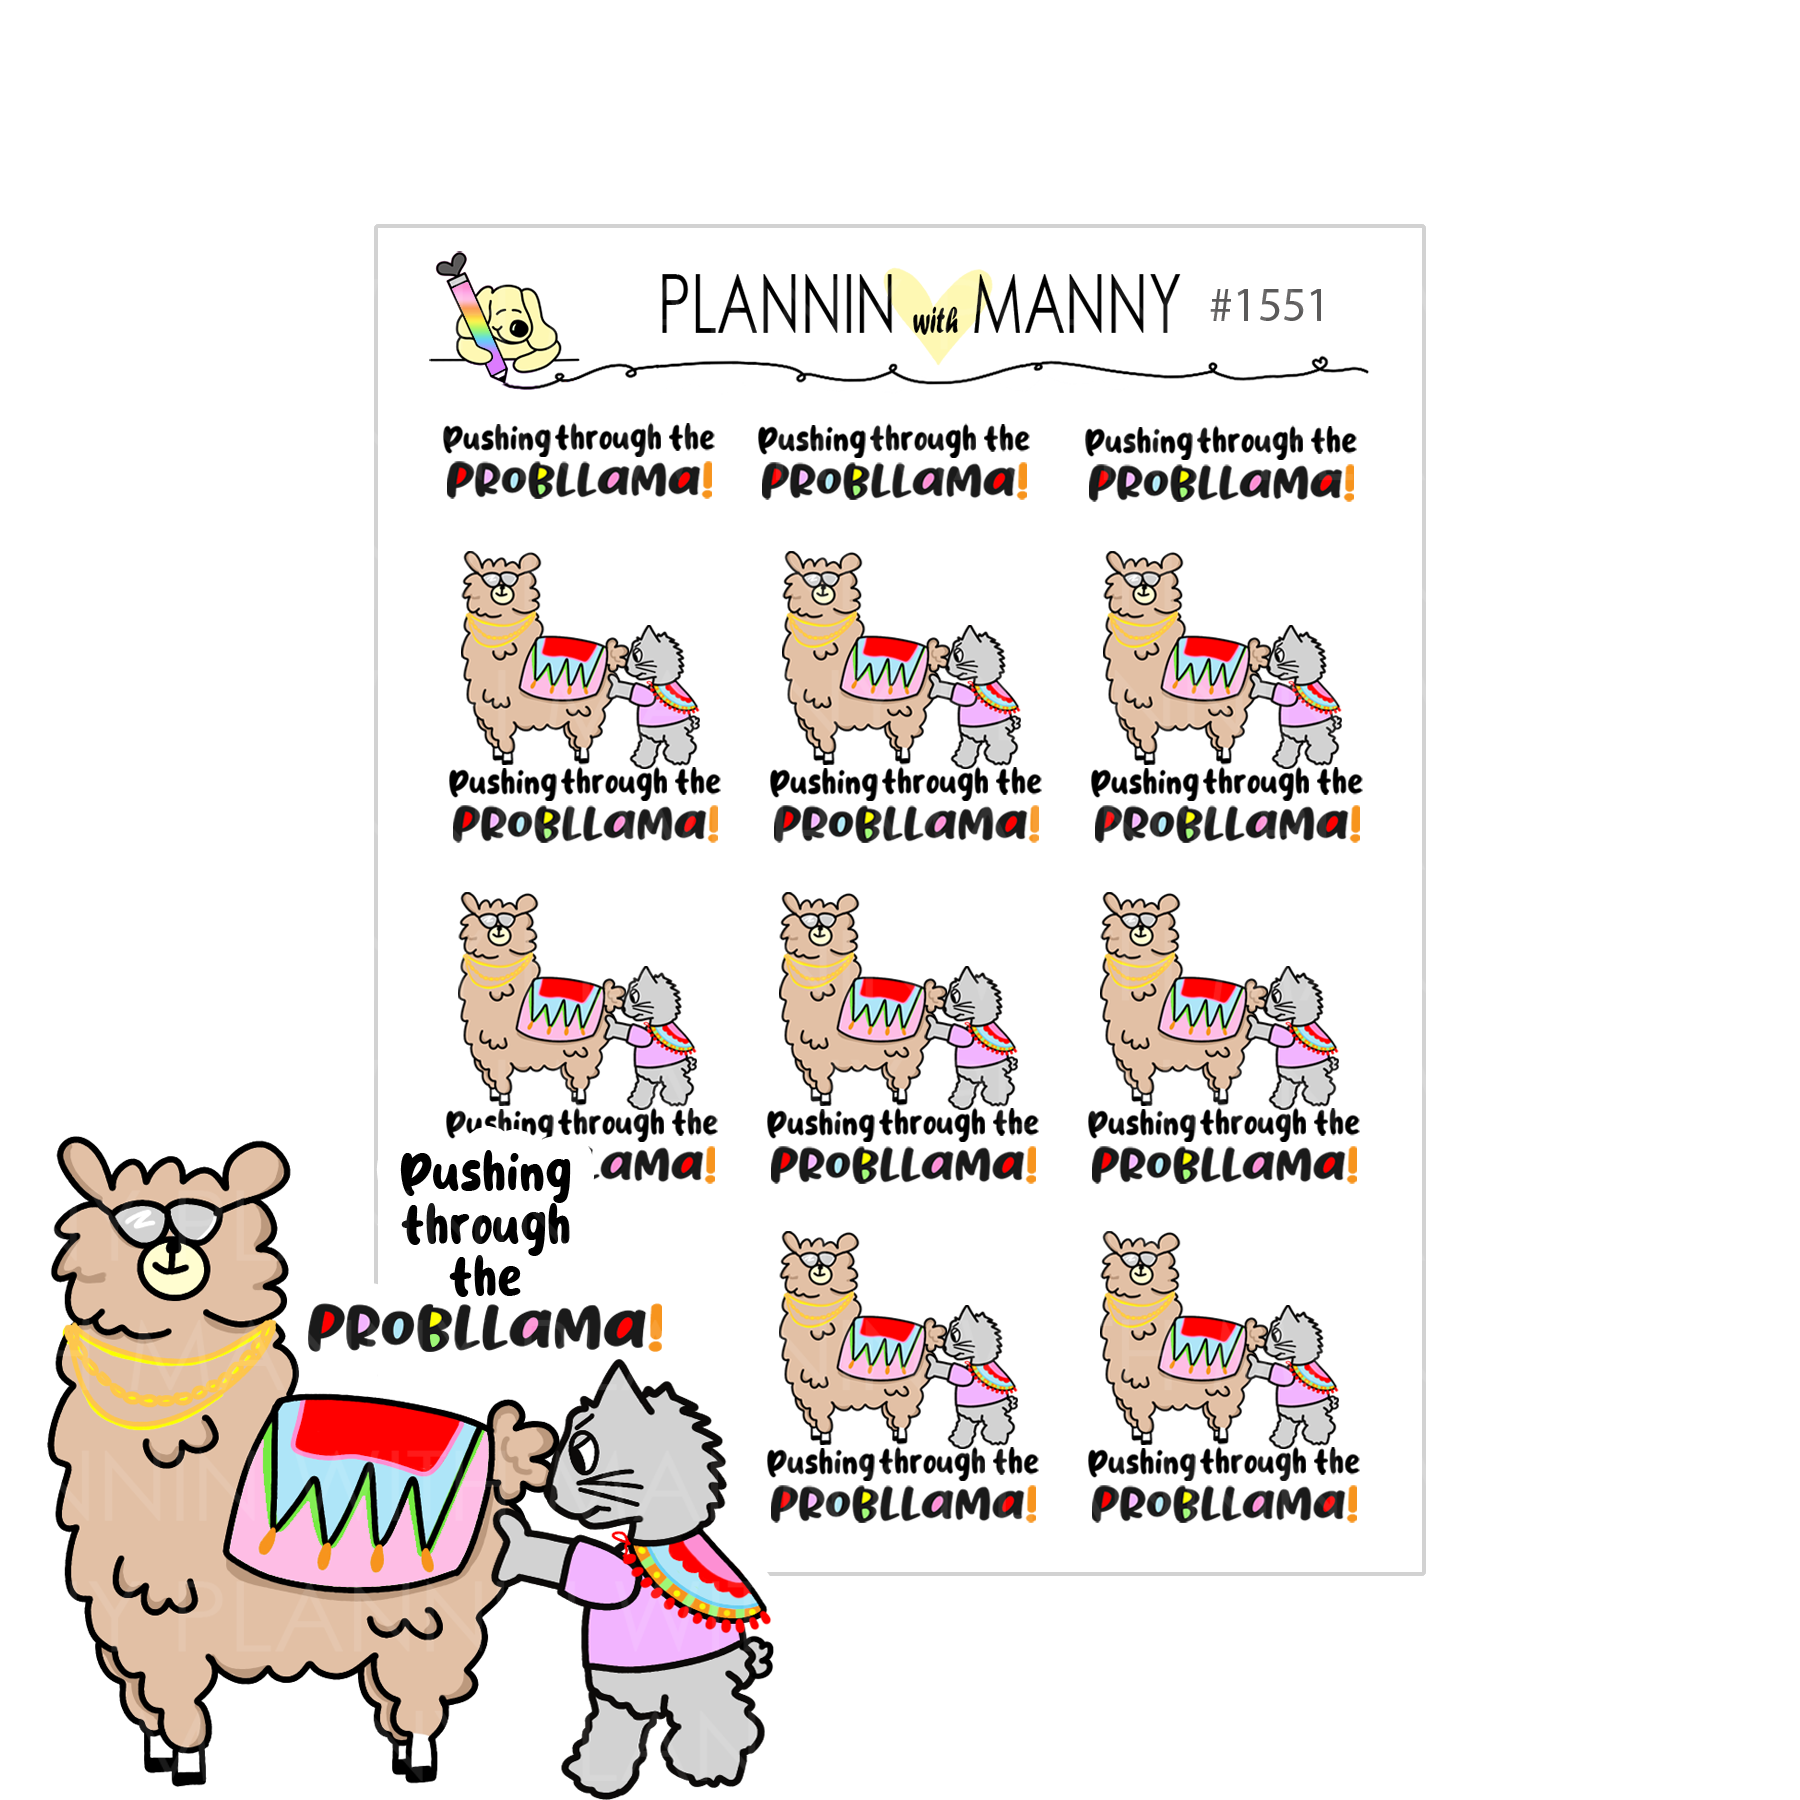 1551 Pushing Through the ProbLLAMAS Planner Stickers